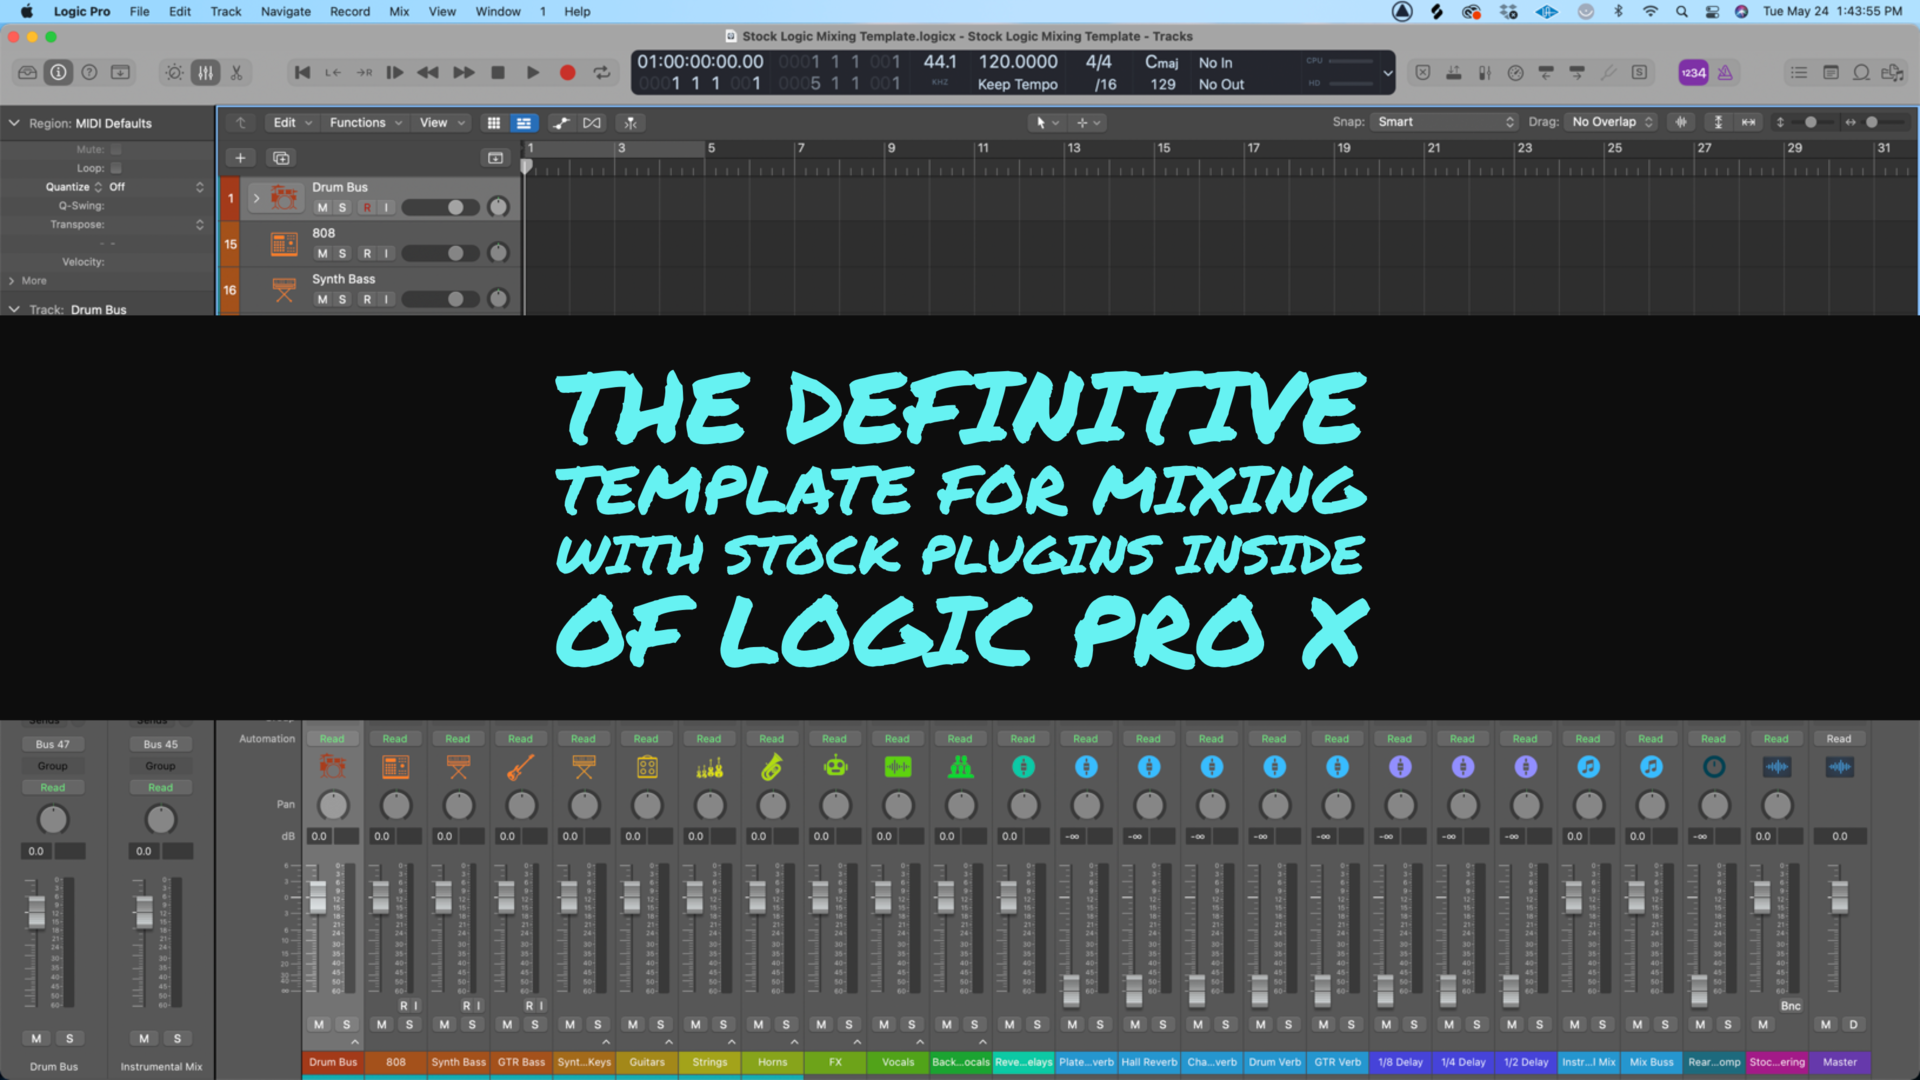 The Definitive Template for Mixing With Stock Plugins Inside of Logic Pro X